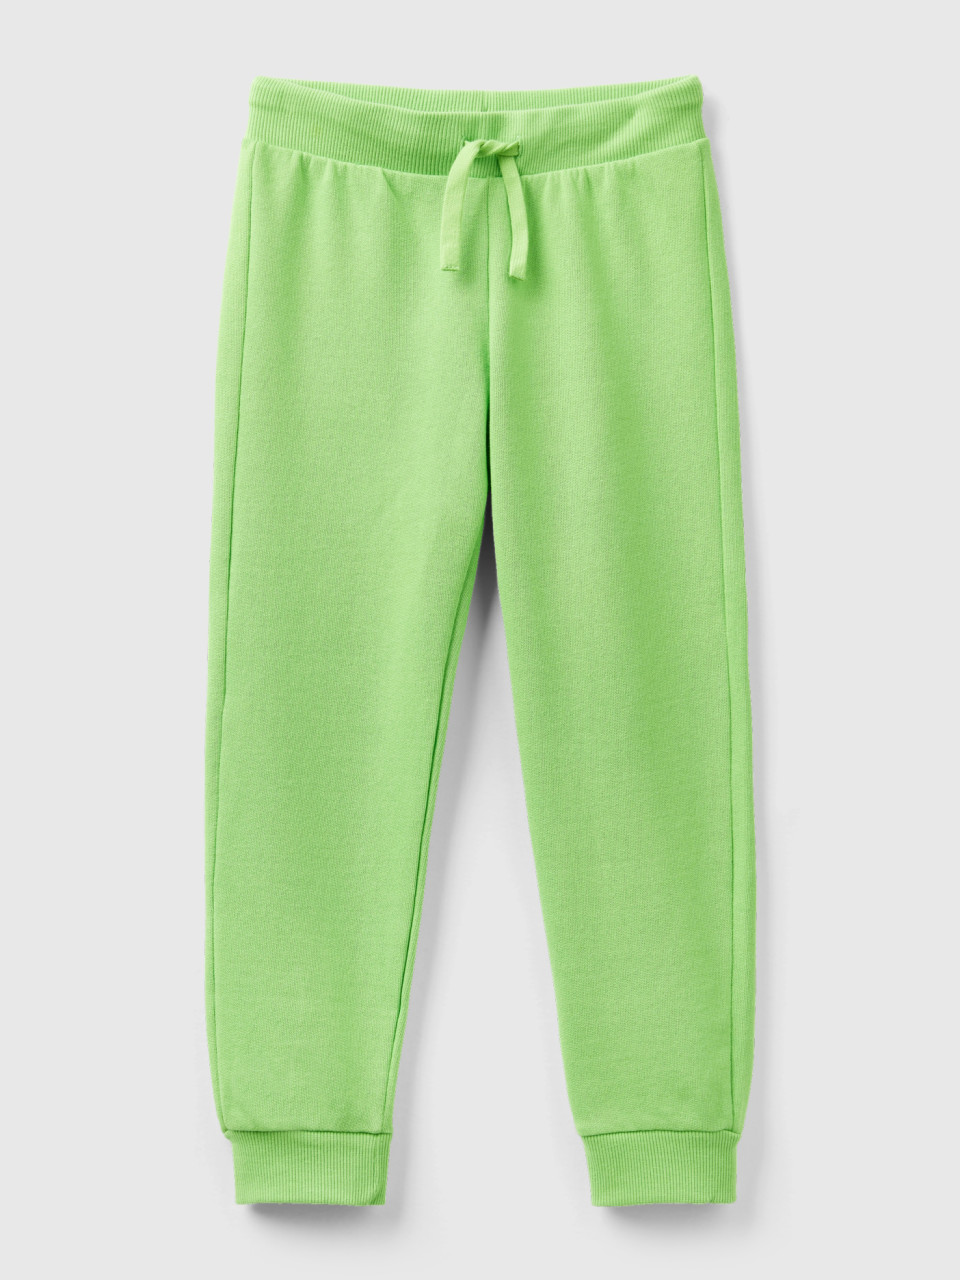 Benetton, Sporty Trousers With Drawstring, Light Green, Kids